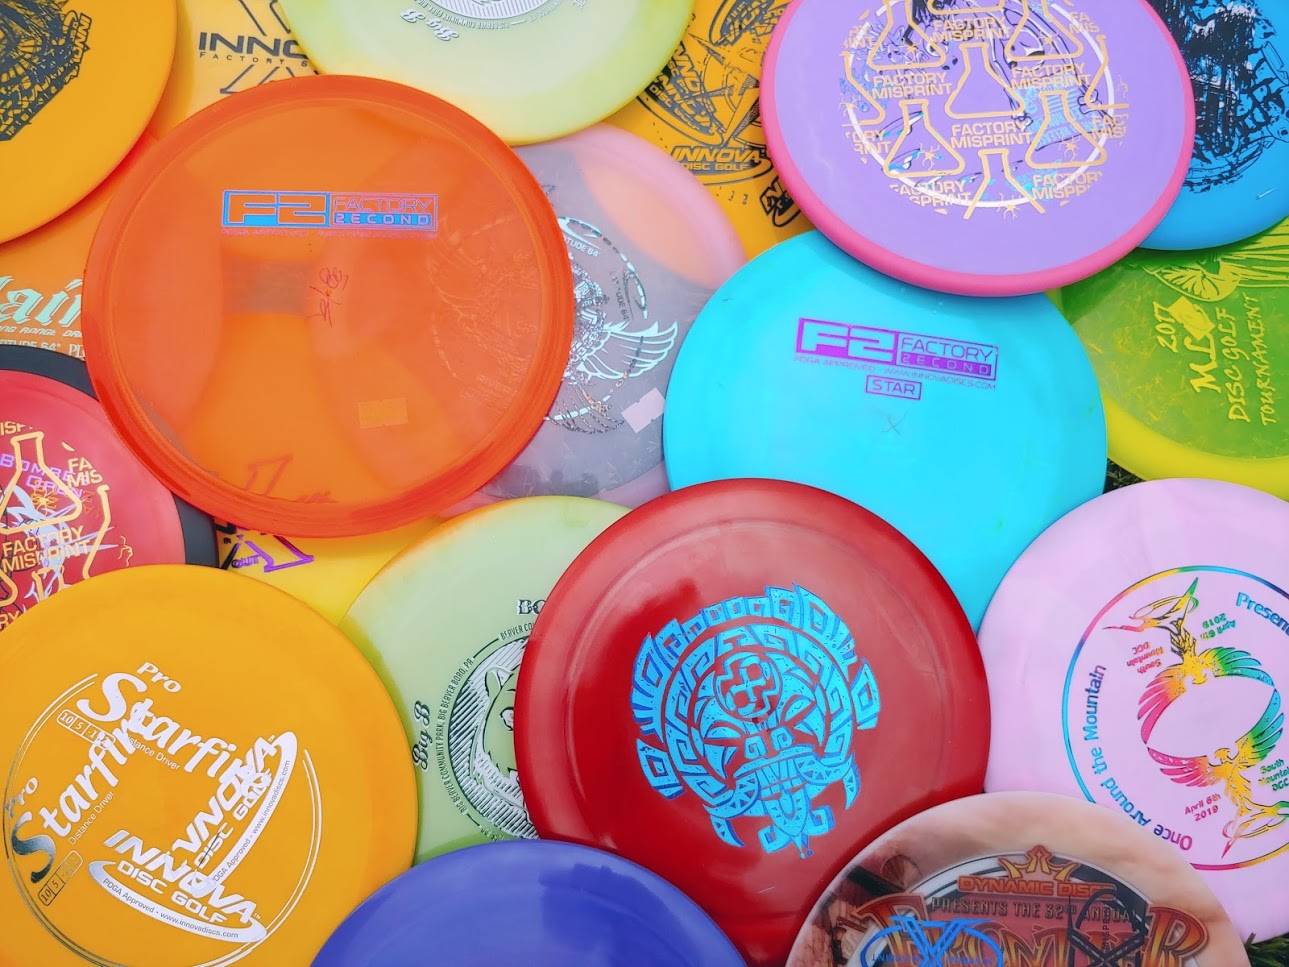 What Do The Numbers Mean On Frisbee Golf Discs?